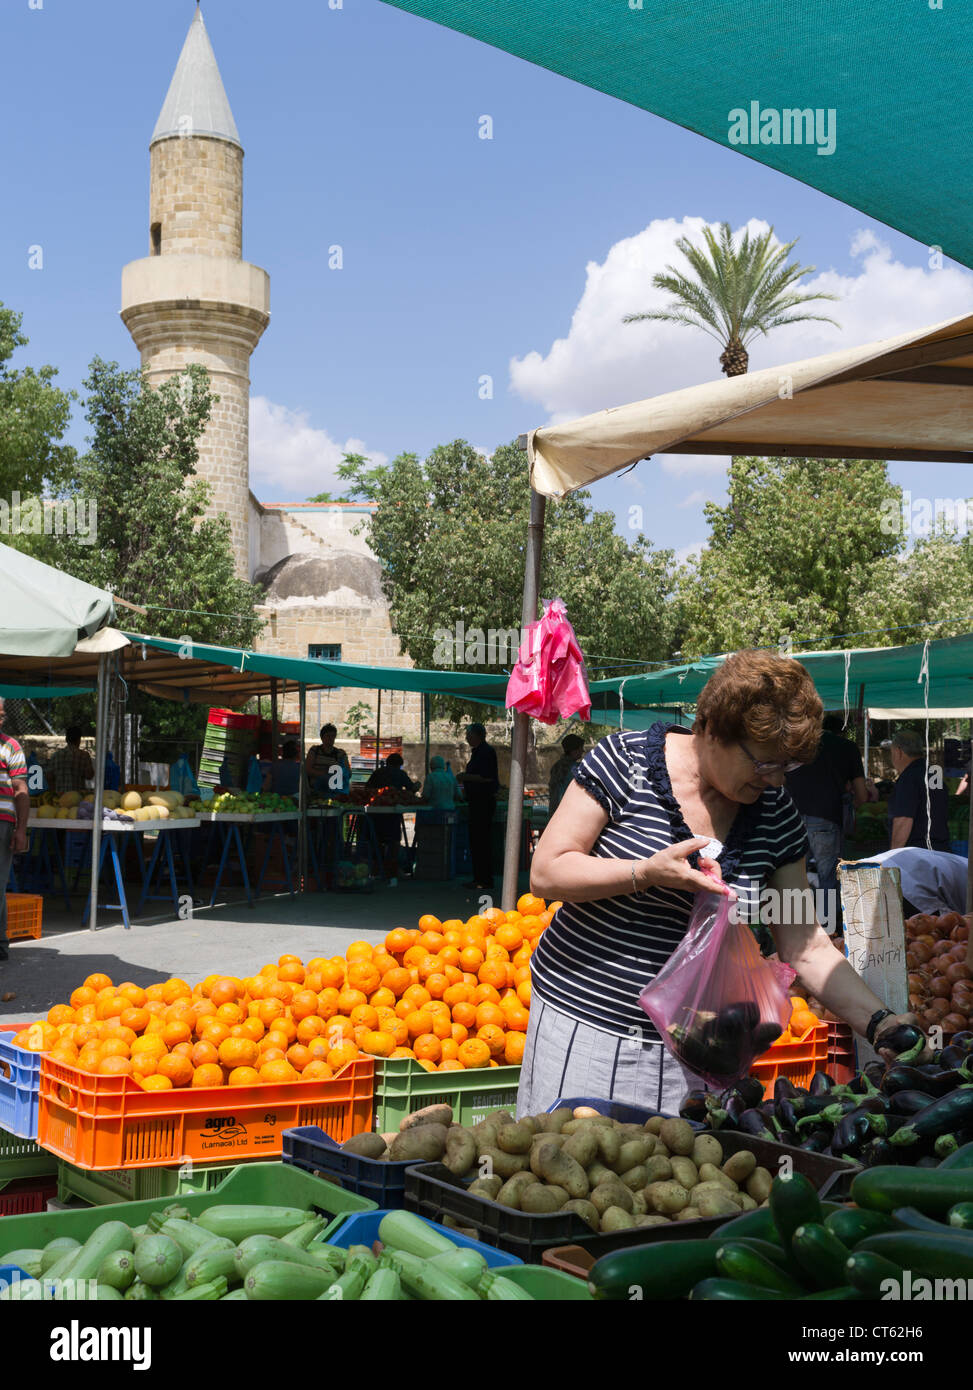 dh Lefkosia Saturday Market NICOSIA SOUTH CYPRUS Local woman customer at open air fruit vegetable market greek shopping stall people greece Stock Photo